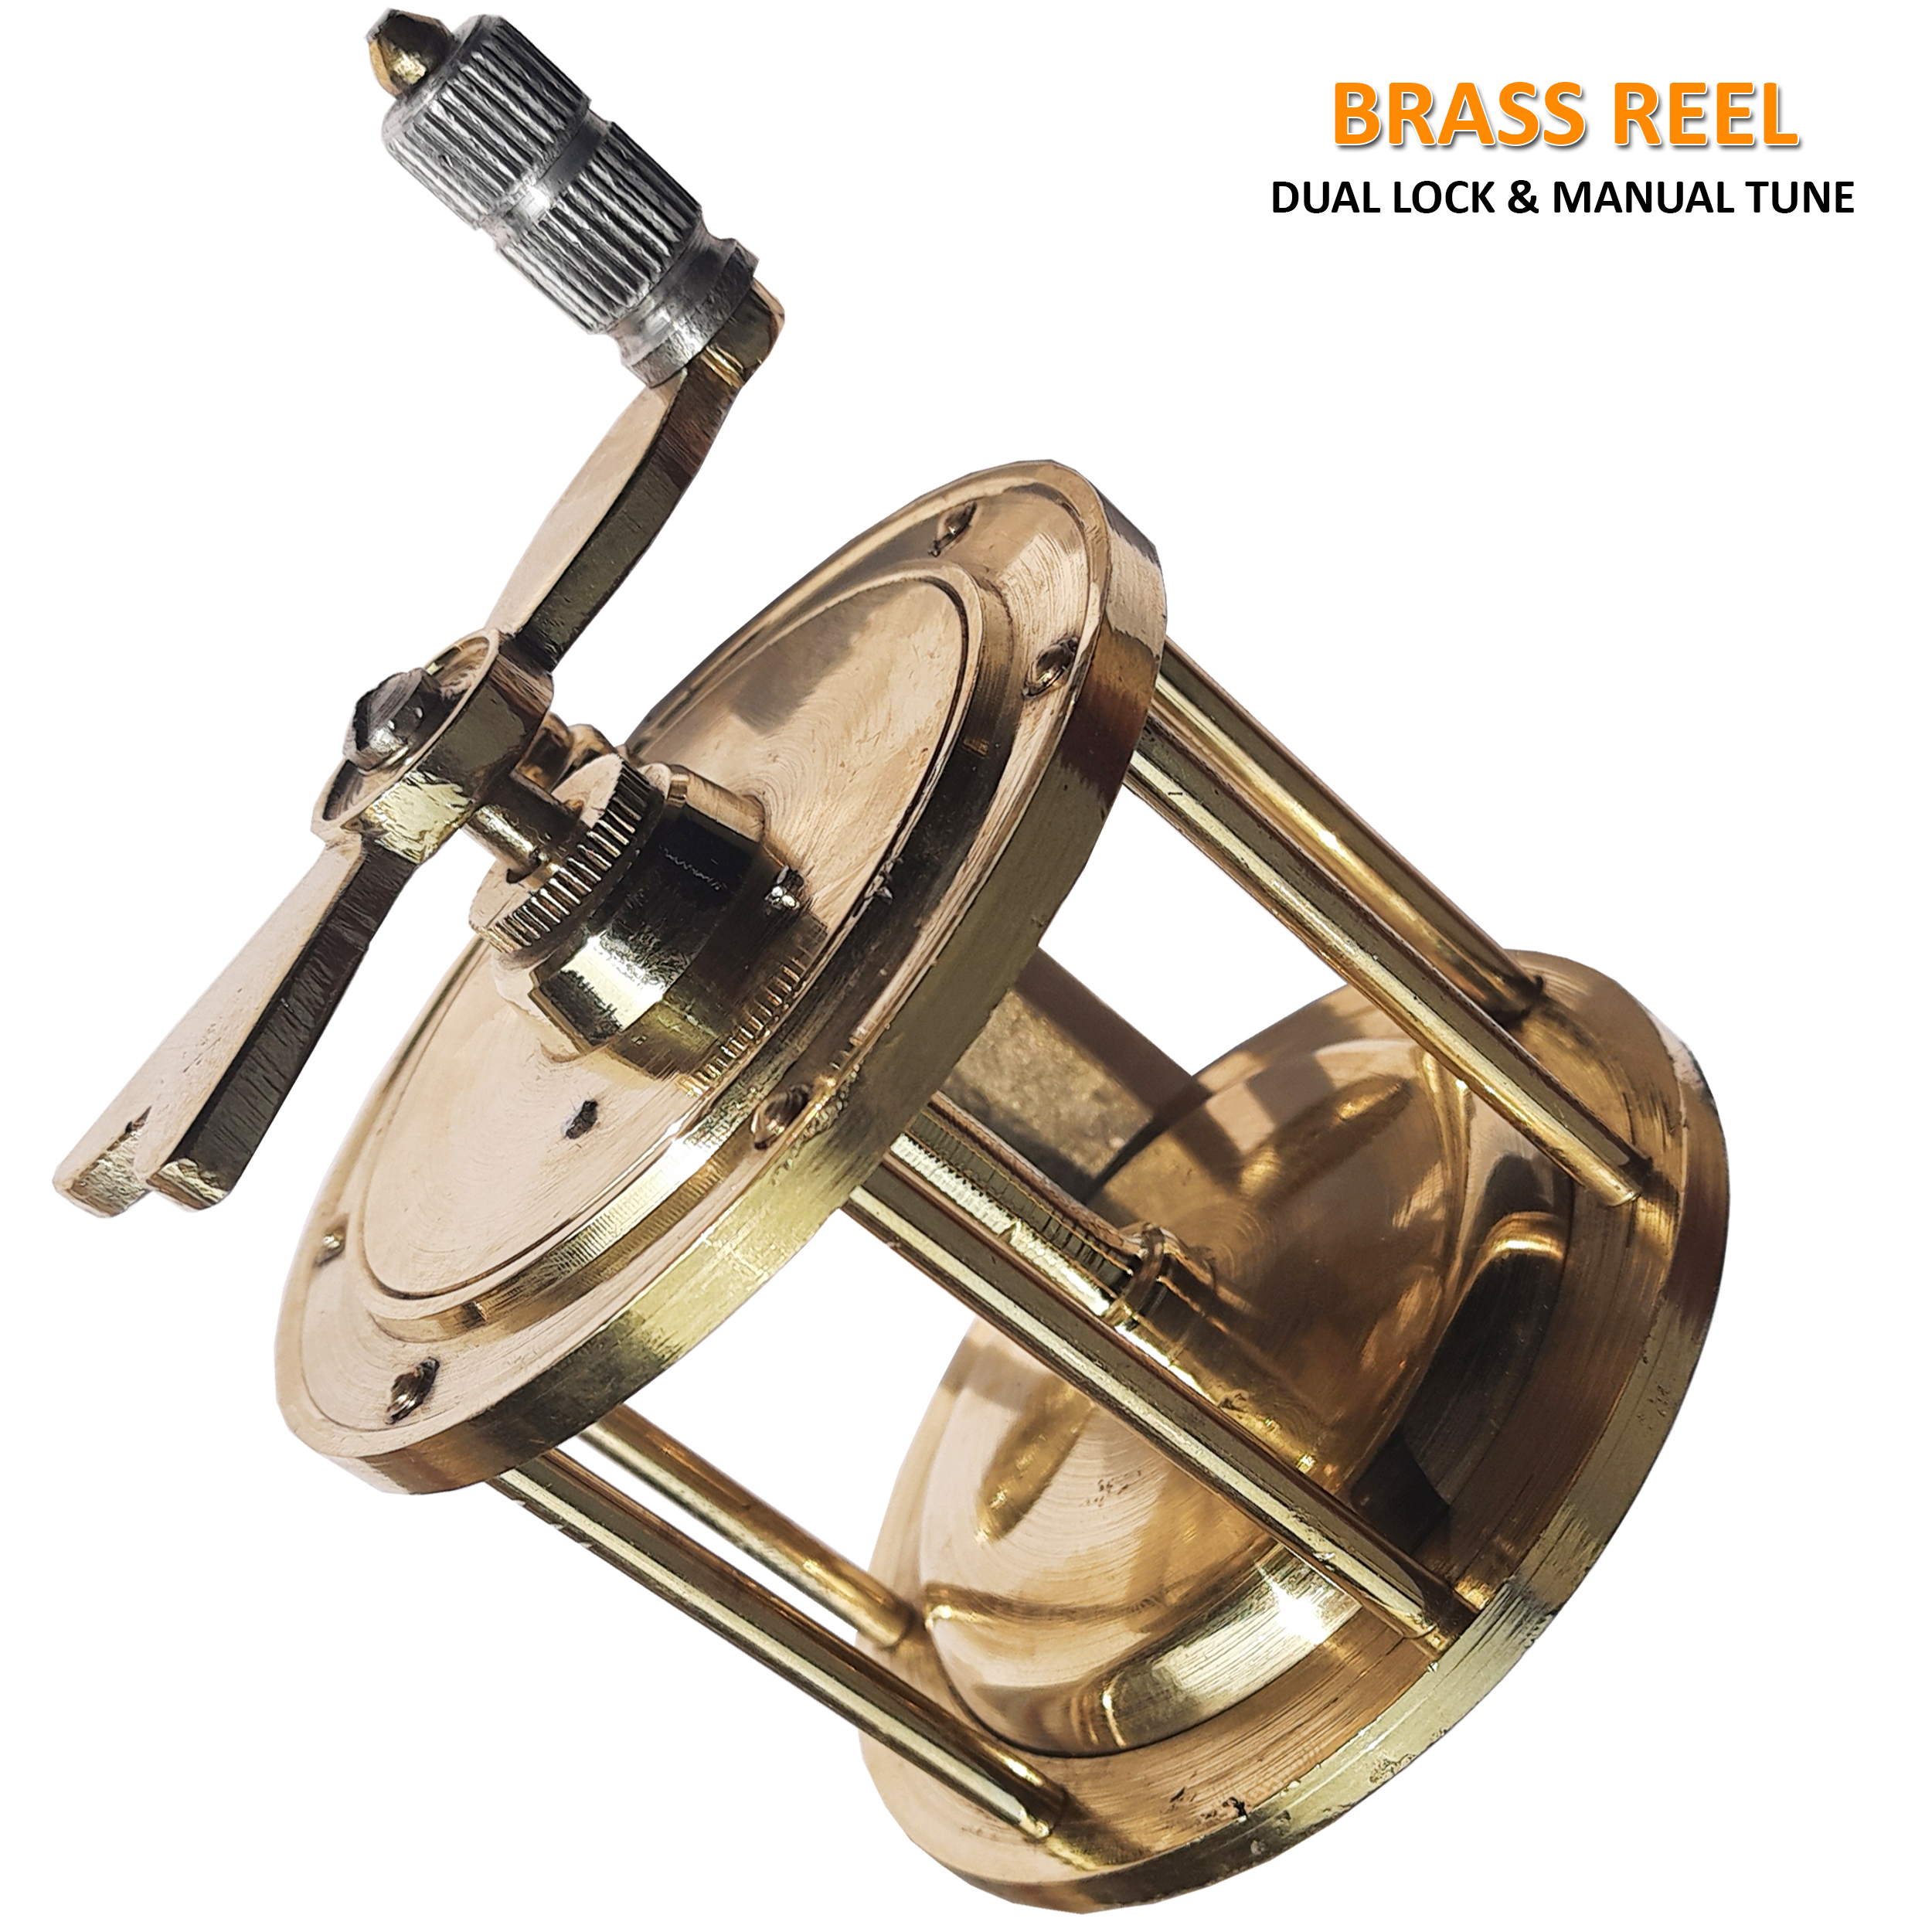 Buy Brass Reel Dual Bar with Manual Tuning 3.5 inch Fishing Reel Online at